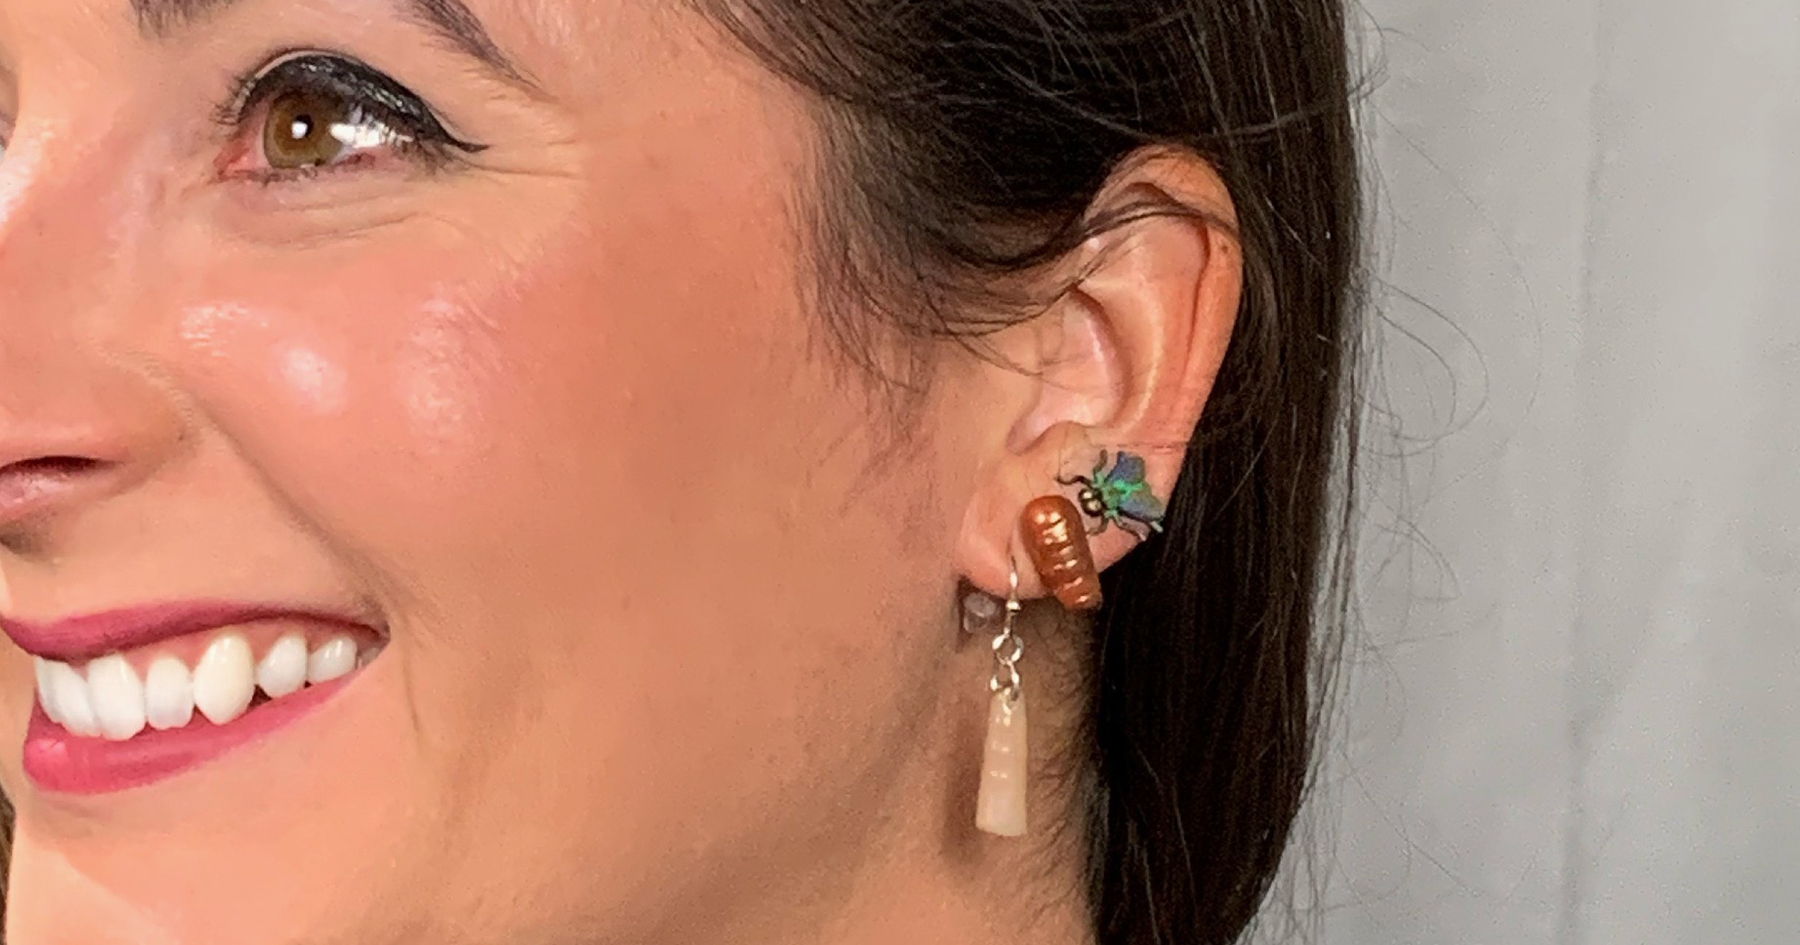 Krystal Hans shows off her insect jewelry